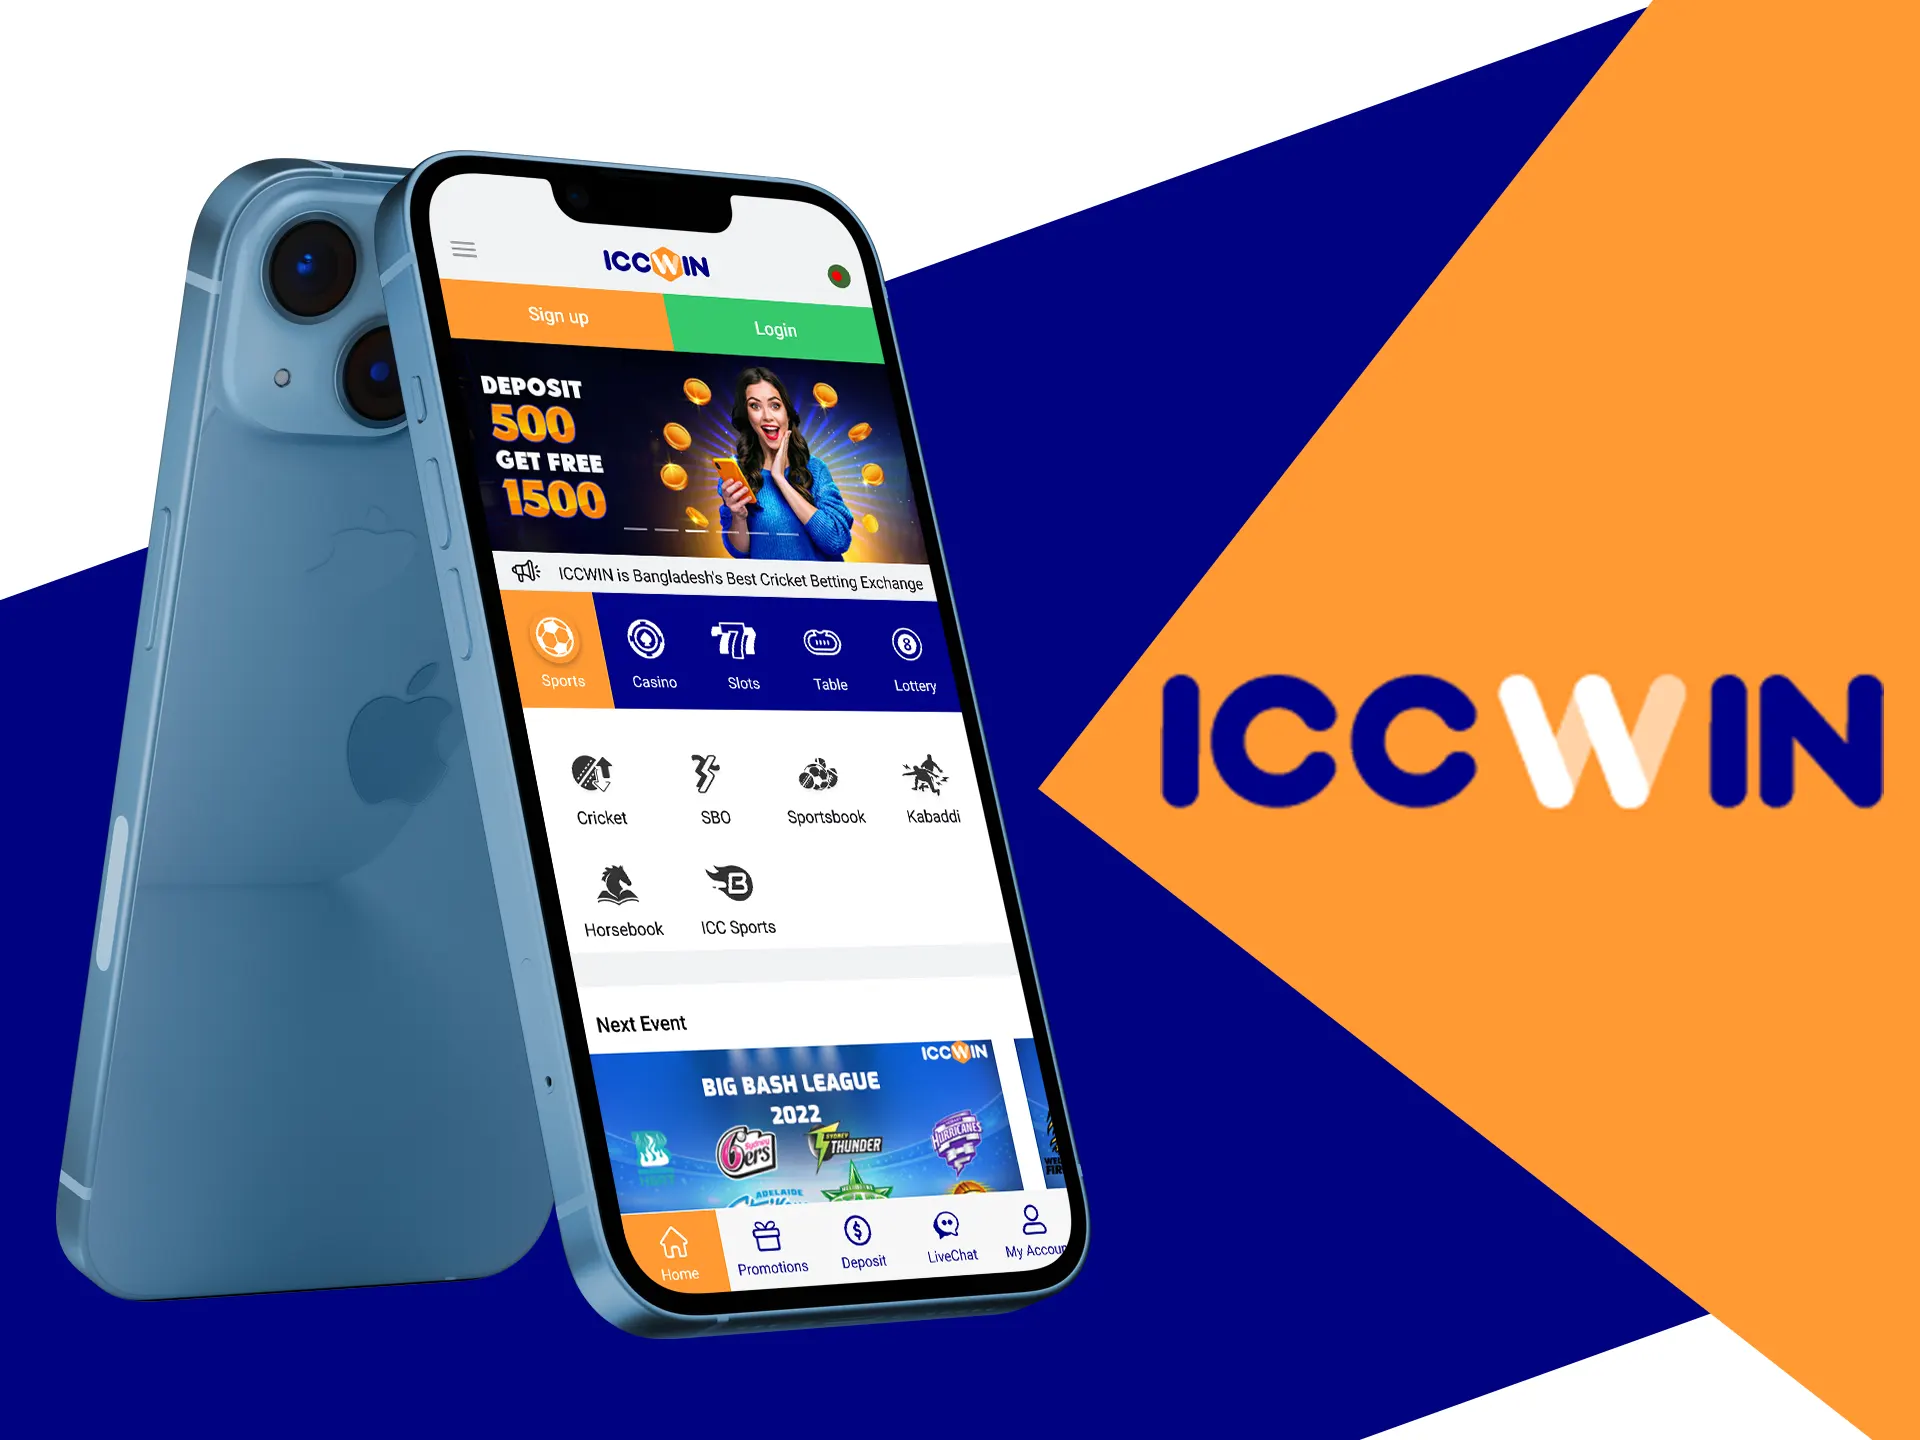 If you spend a lot of time away from home on the road, the ICCWIN app can help you enjoy a pleasurable betting experience.